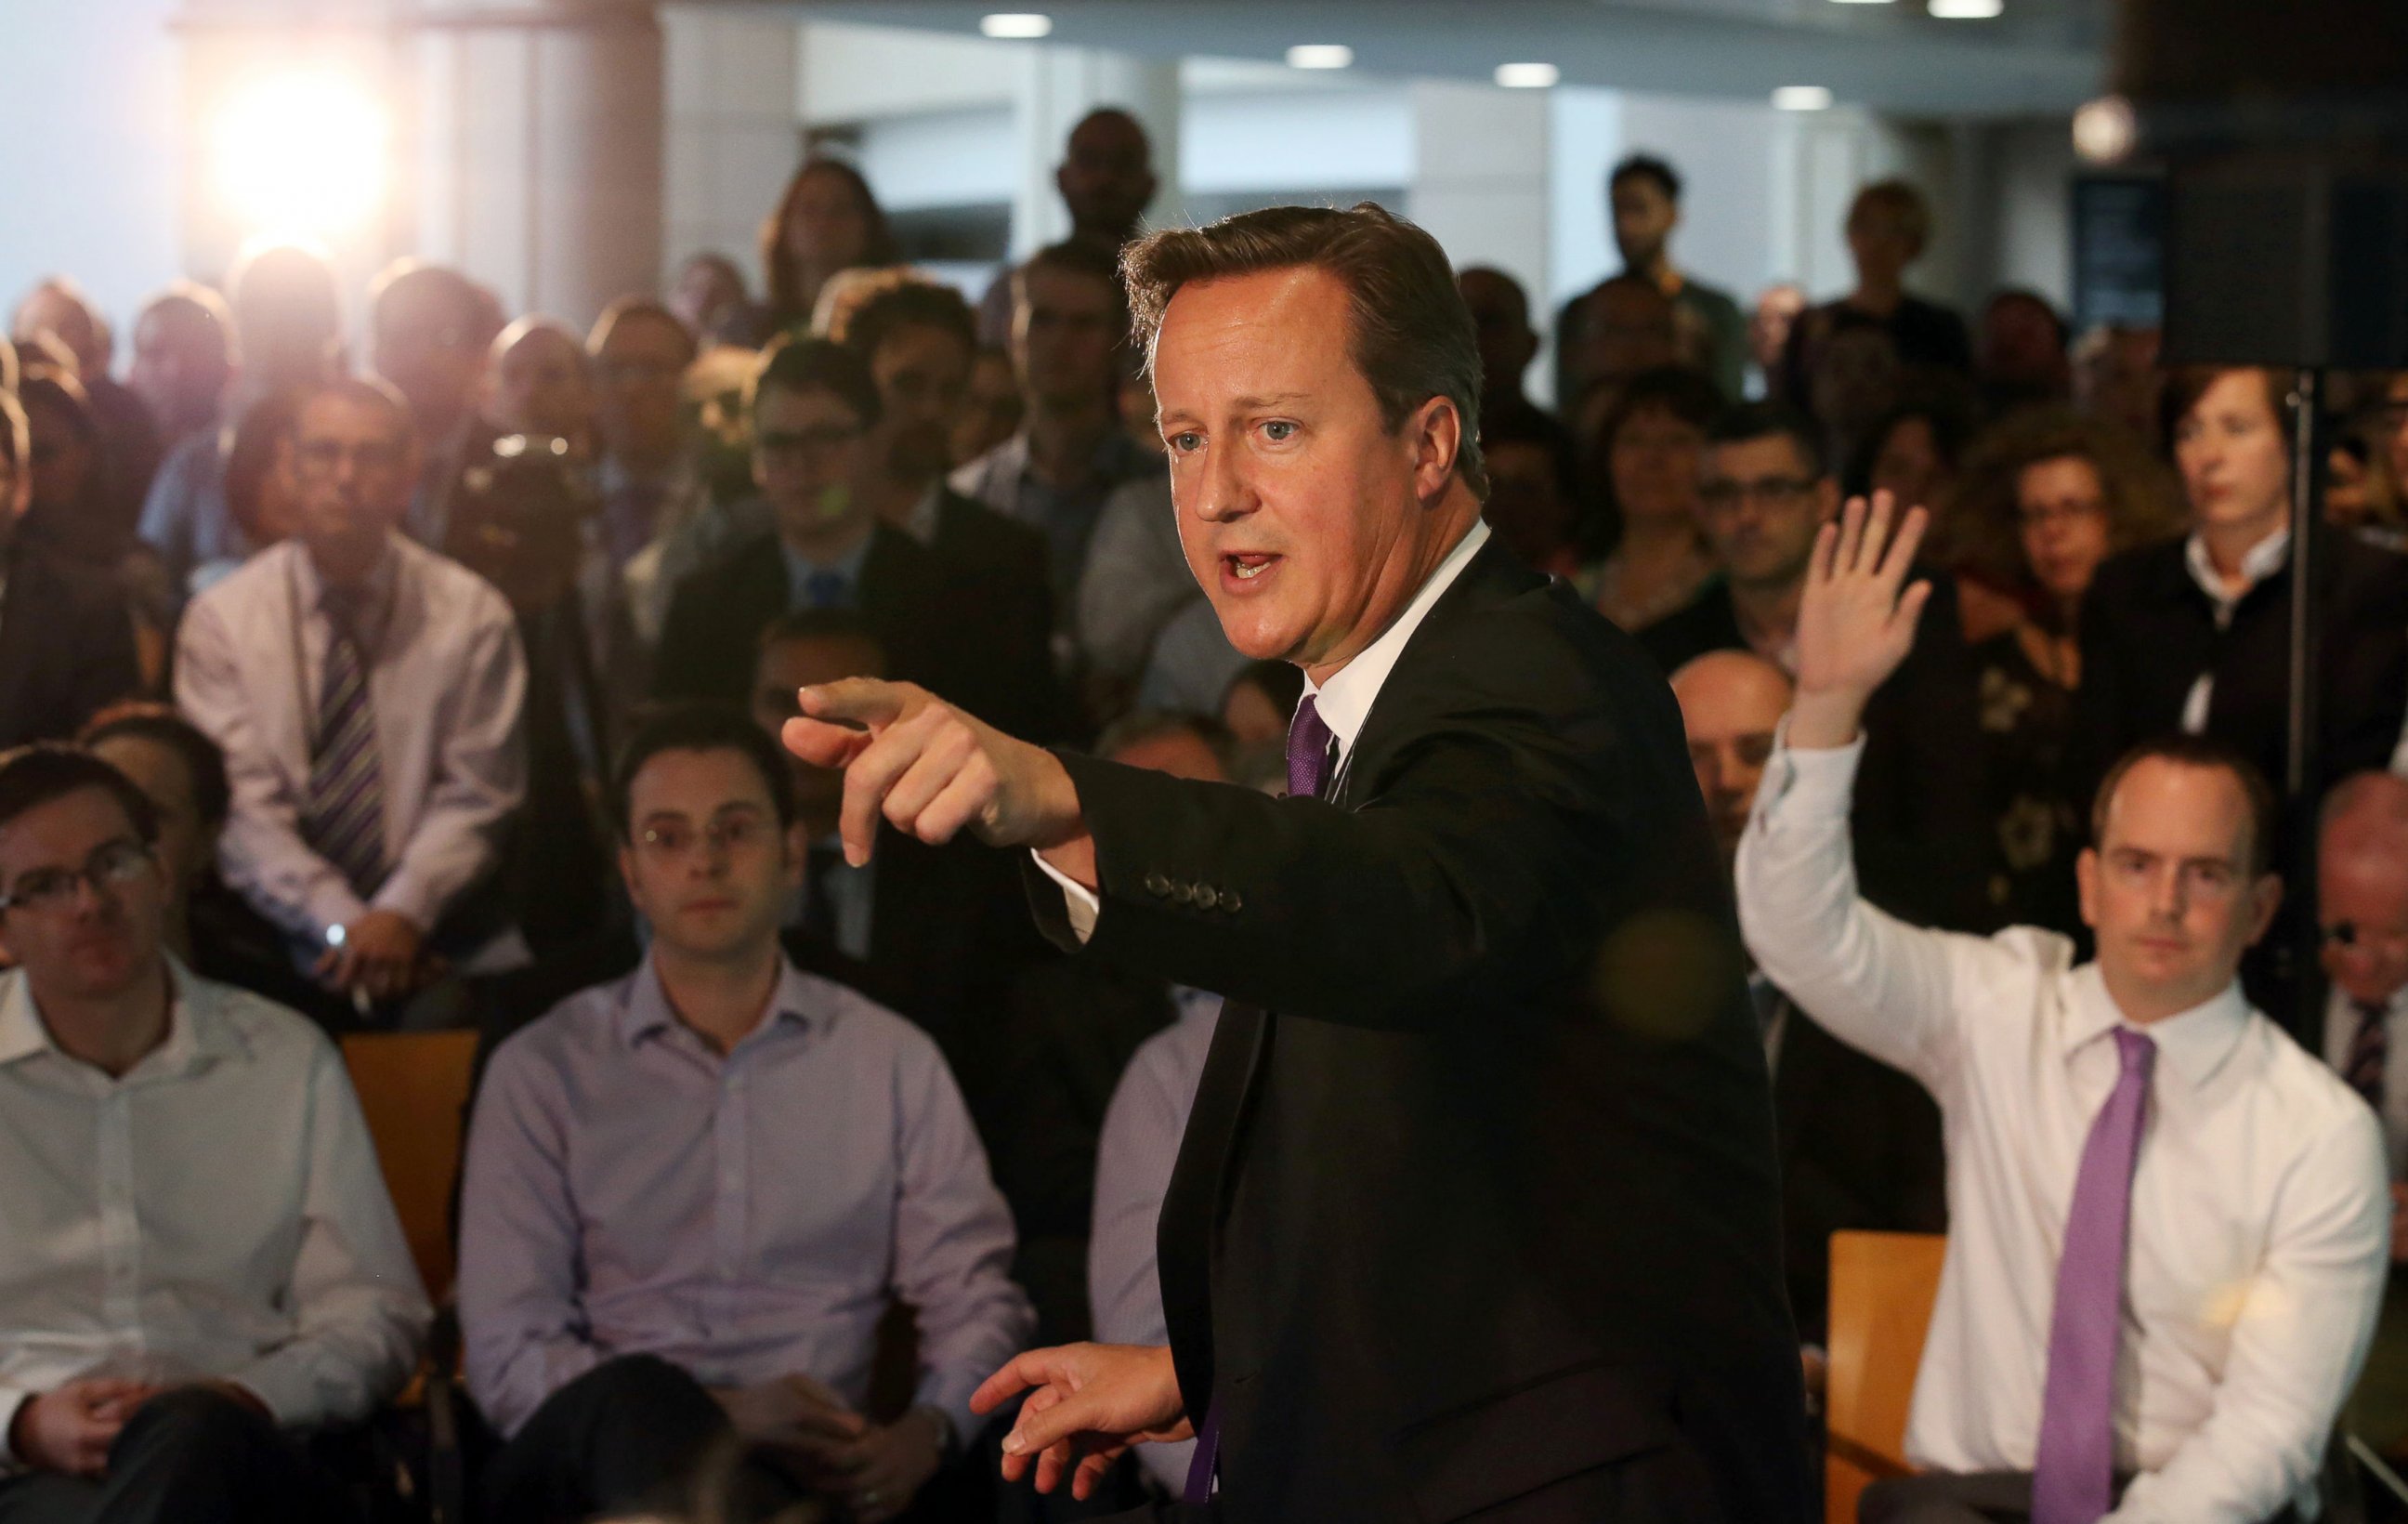 PHOTO: Britain's Prime Minister, David Cameron, speaks during a visit to a financial office in Edinburgh, Sept. 10, 2014, where he made an impassioned plea to keep Scotland part of the union.